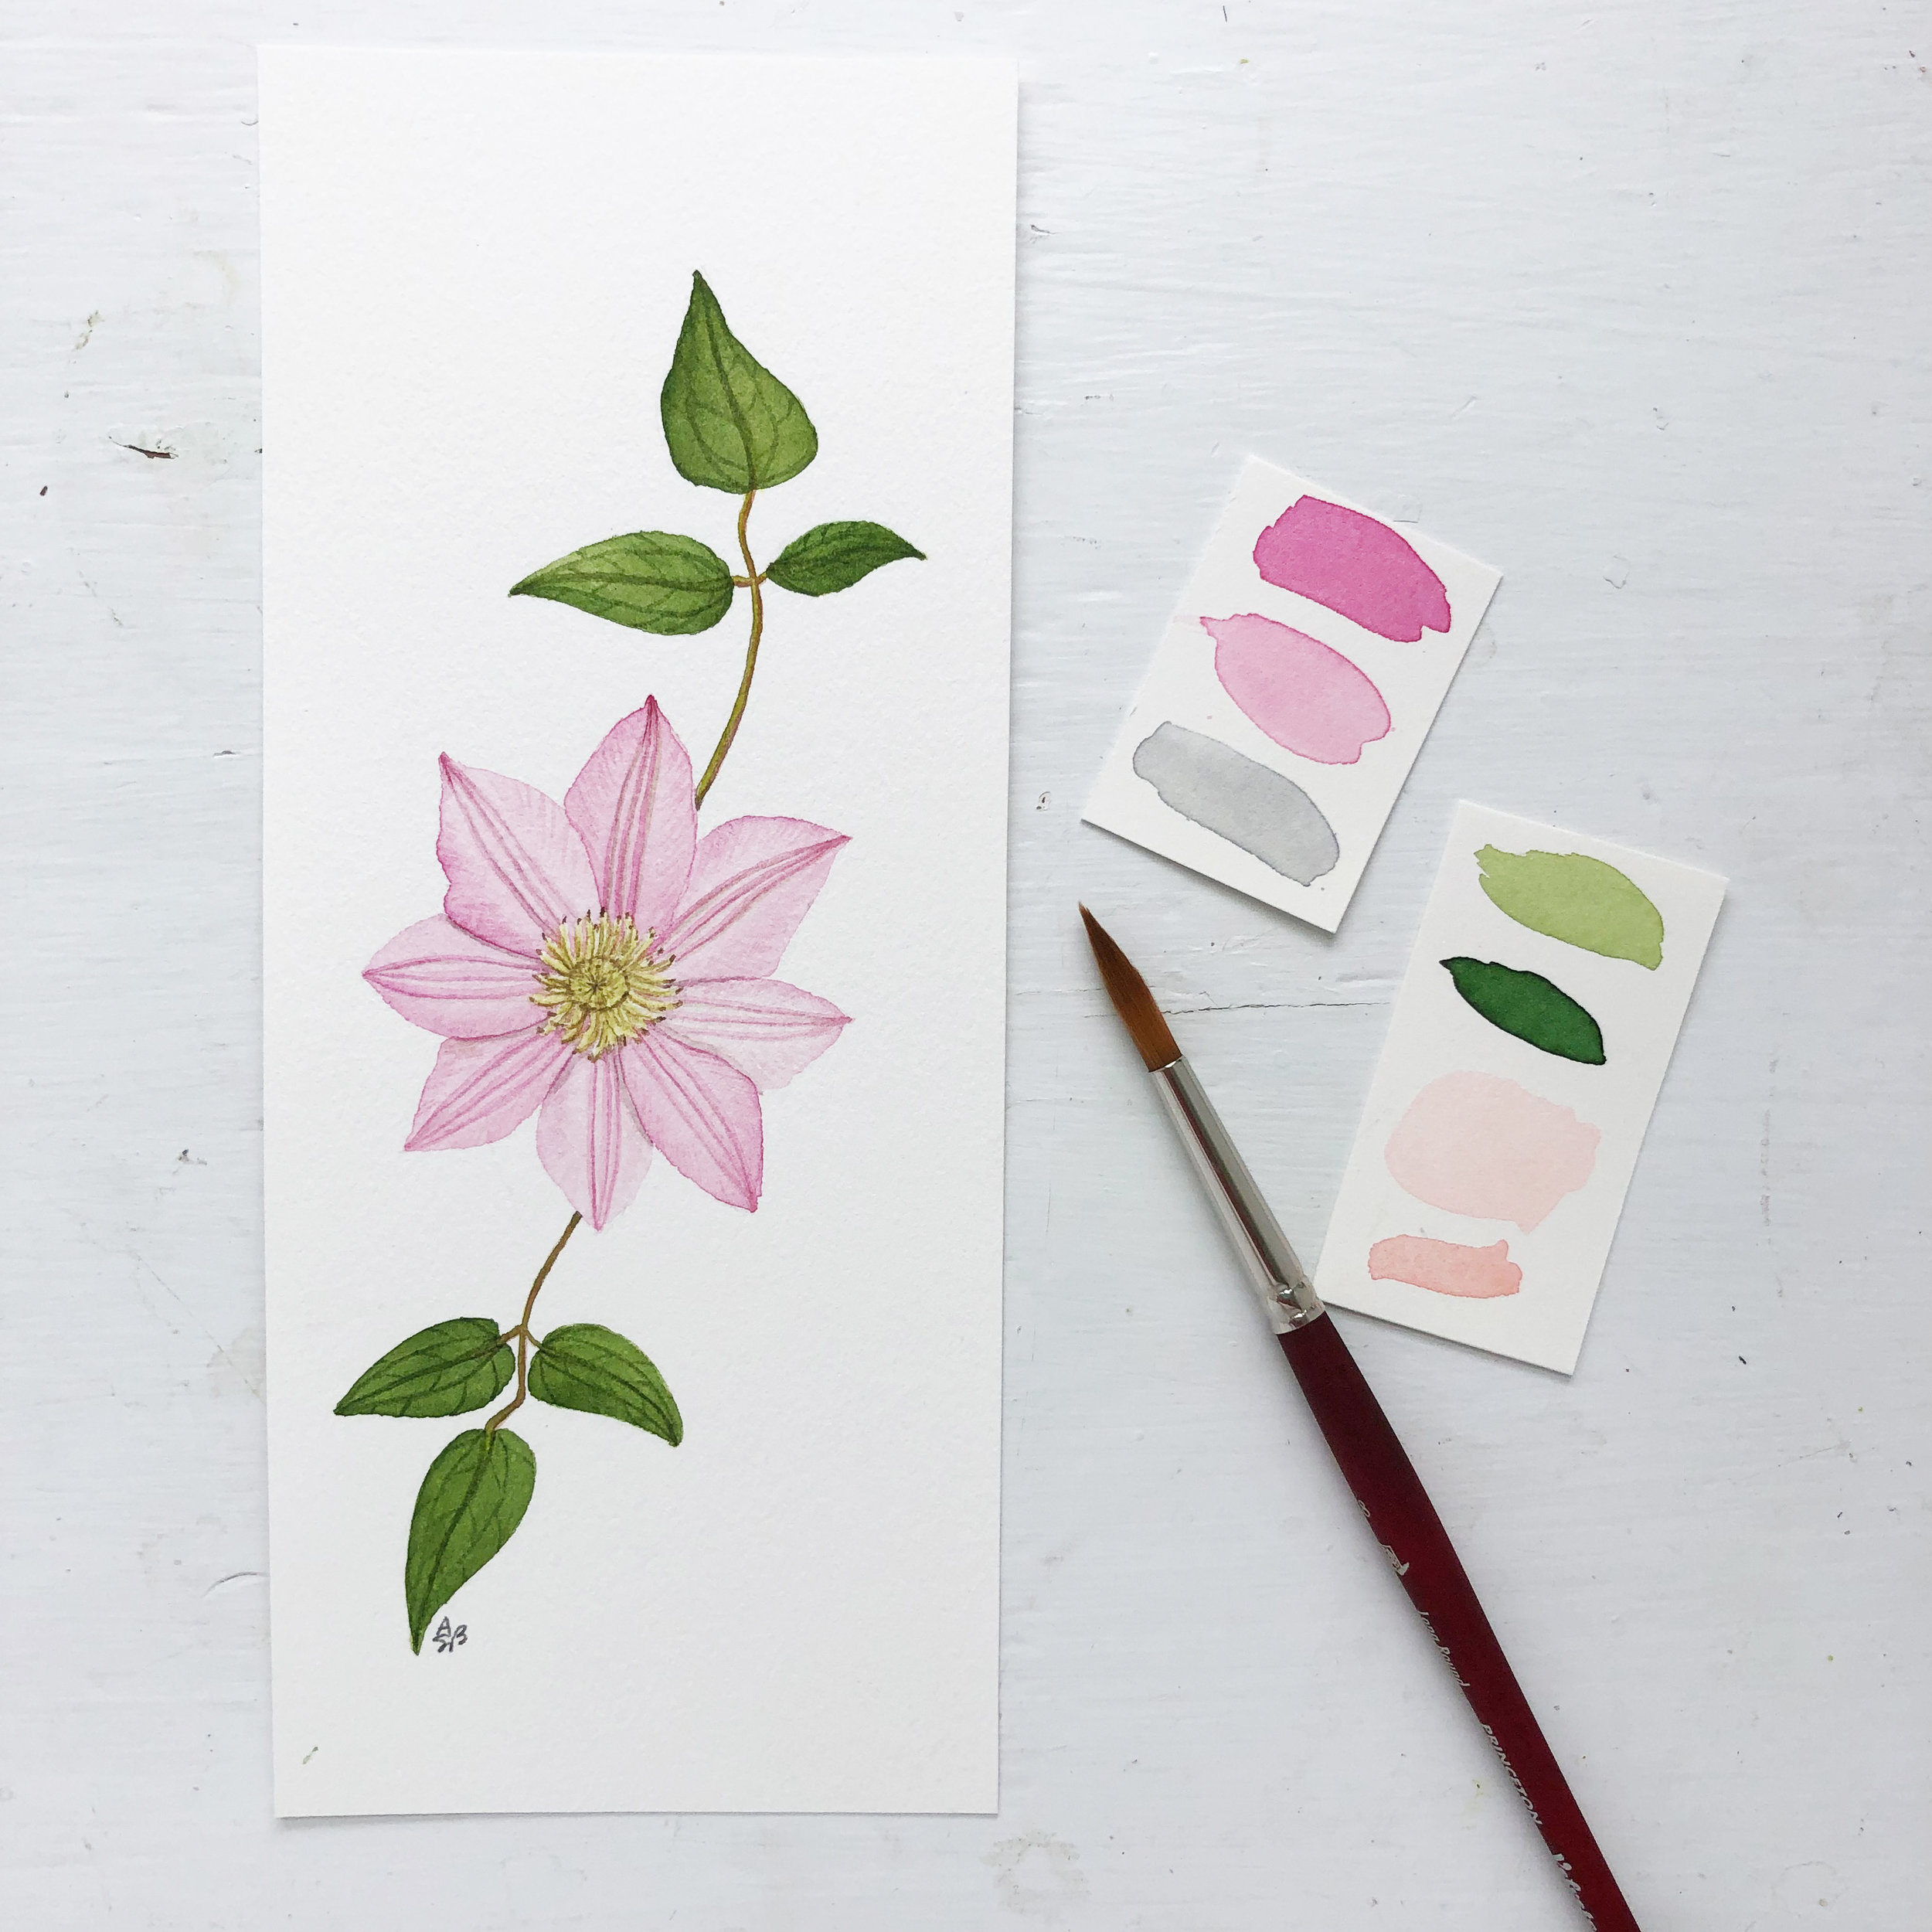 https://images.squarespace-cdn.com/content/v1/542f1965e4b06ff7a6af1efa/1561127169943-59MMCMF9DLXSOYUPSNXO/A+Botanical+Watercolor+Illustration+of+a+Clematis+Flower+Painted+by+Anne+Butera